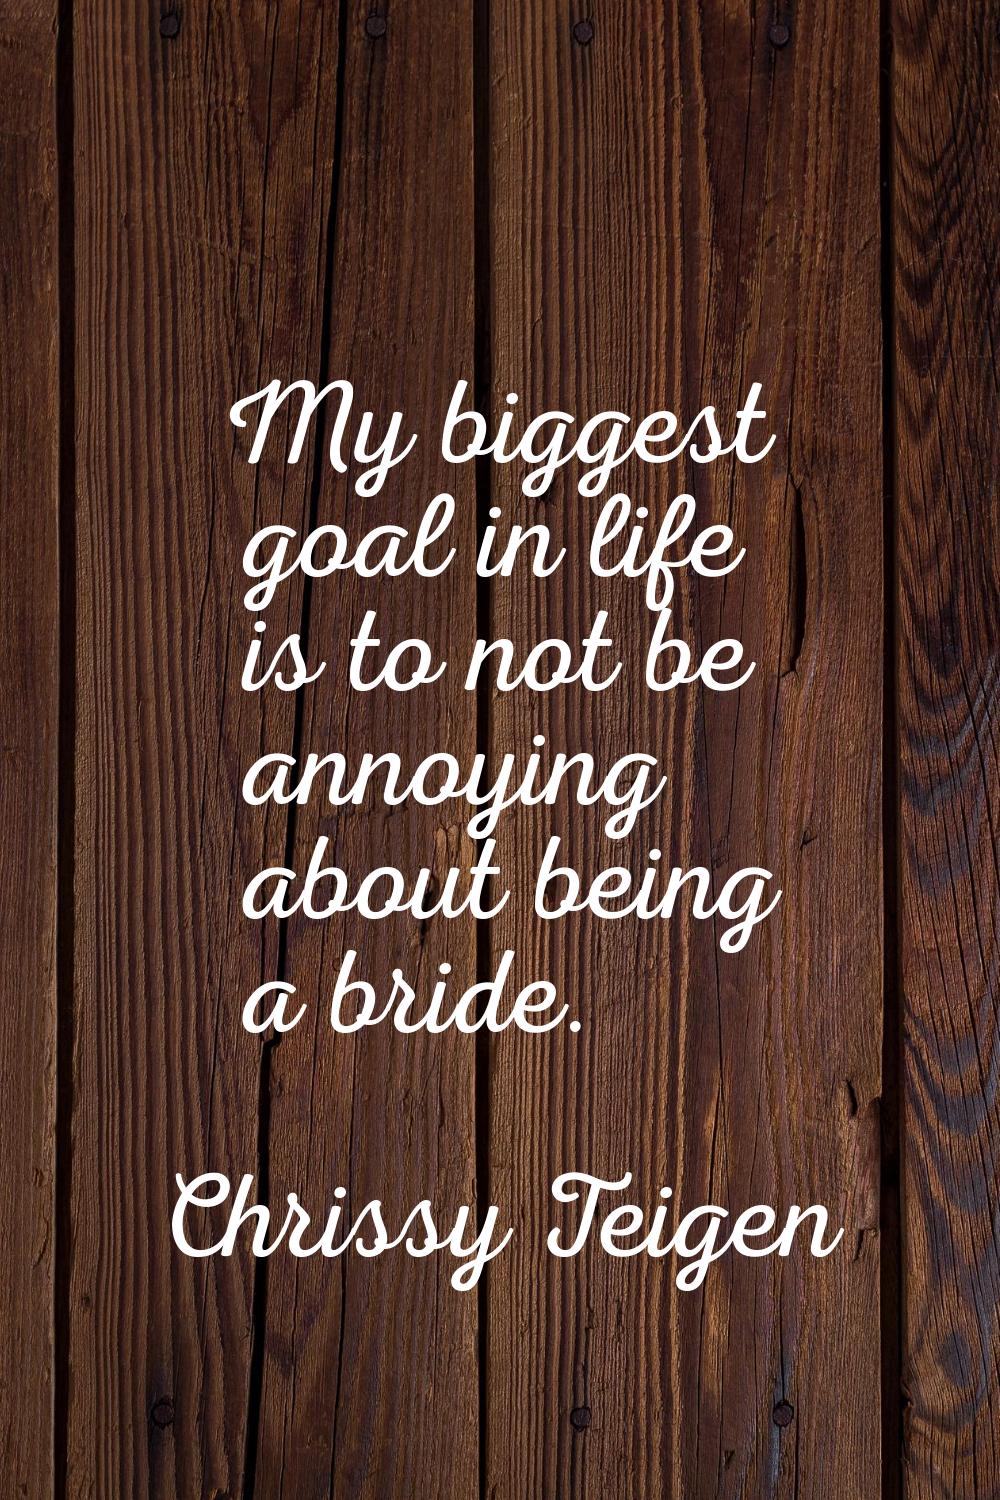 My biggest goal in life is to not be annoying about being a bride.